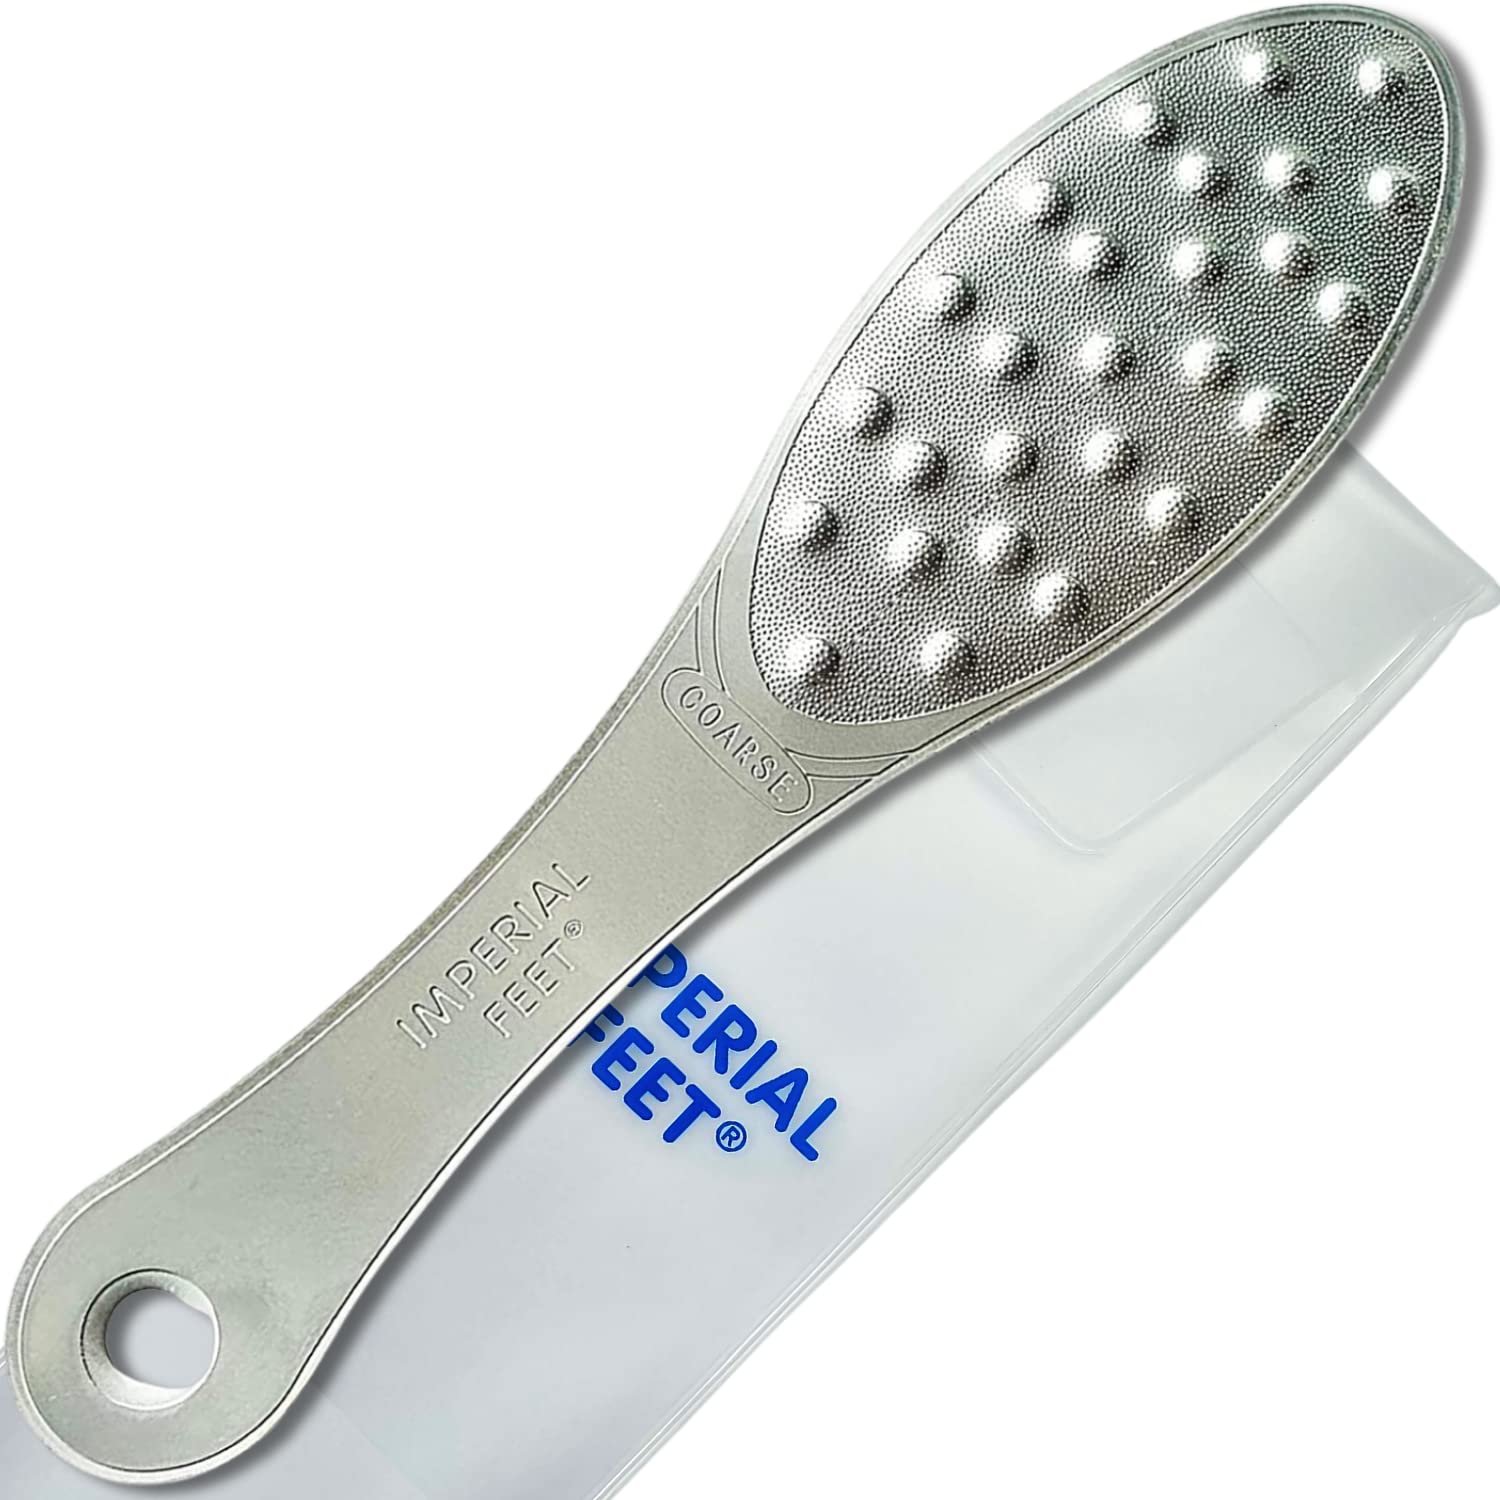 Stainless Steel Foot Scraper, Professional Double-Sided Foot File Callus  Remover for Feet, Foot Rasp Scrubber for Wet Or Dry Skin